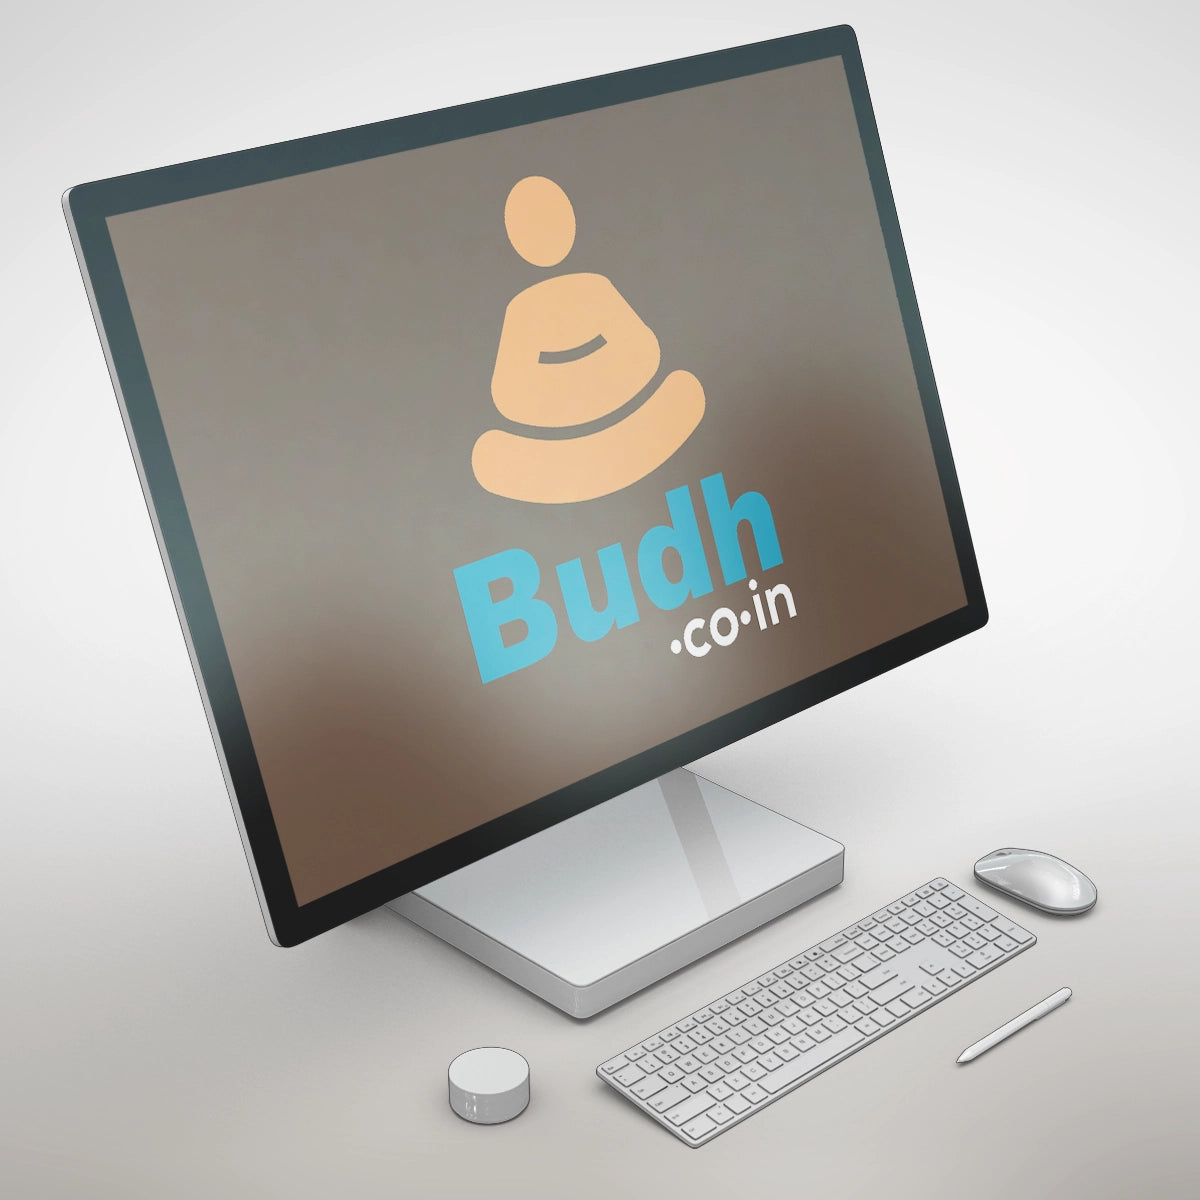 budh.co.in